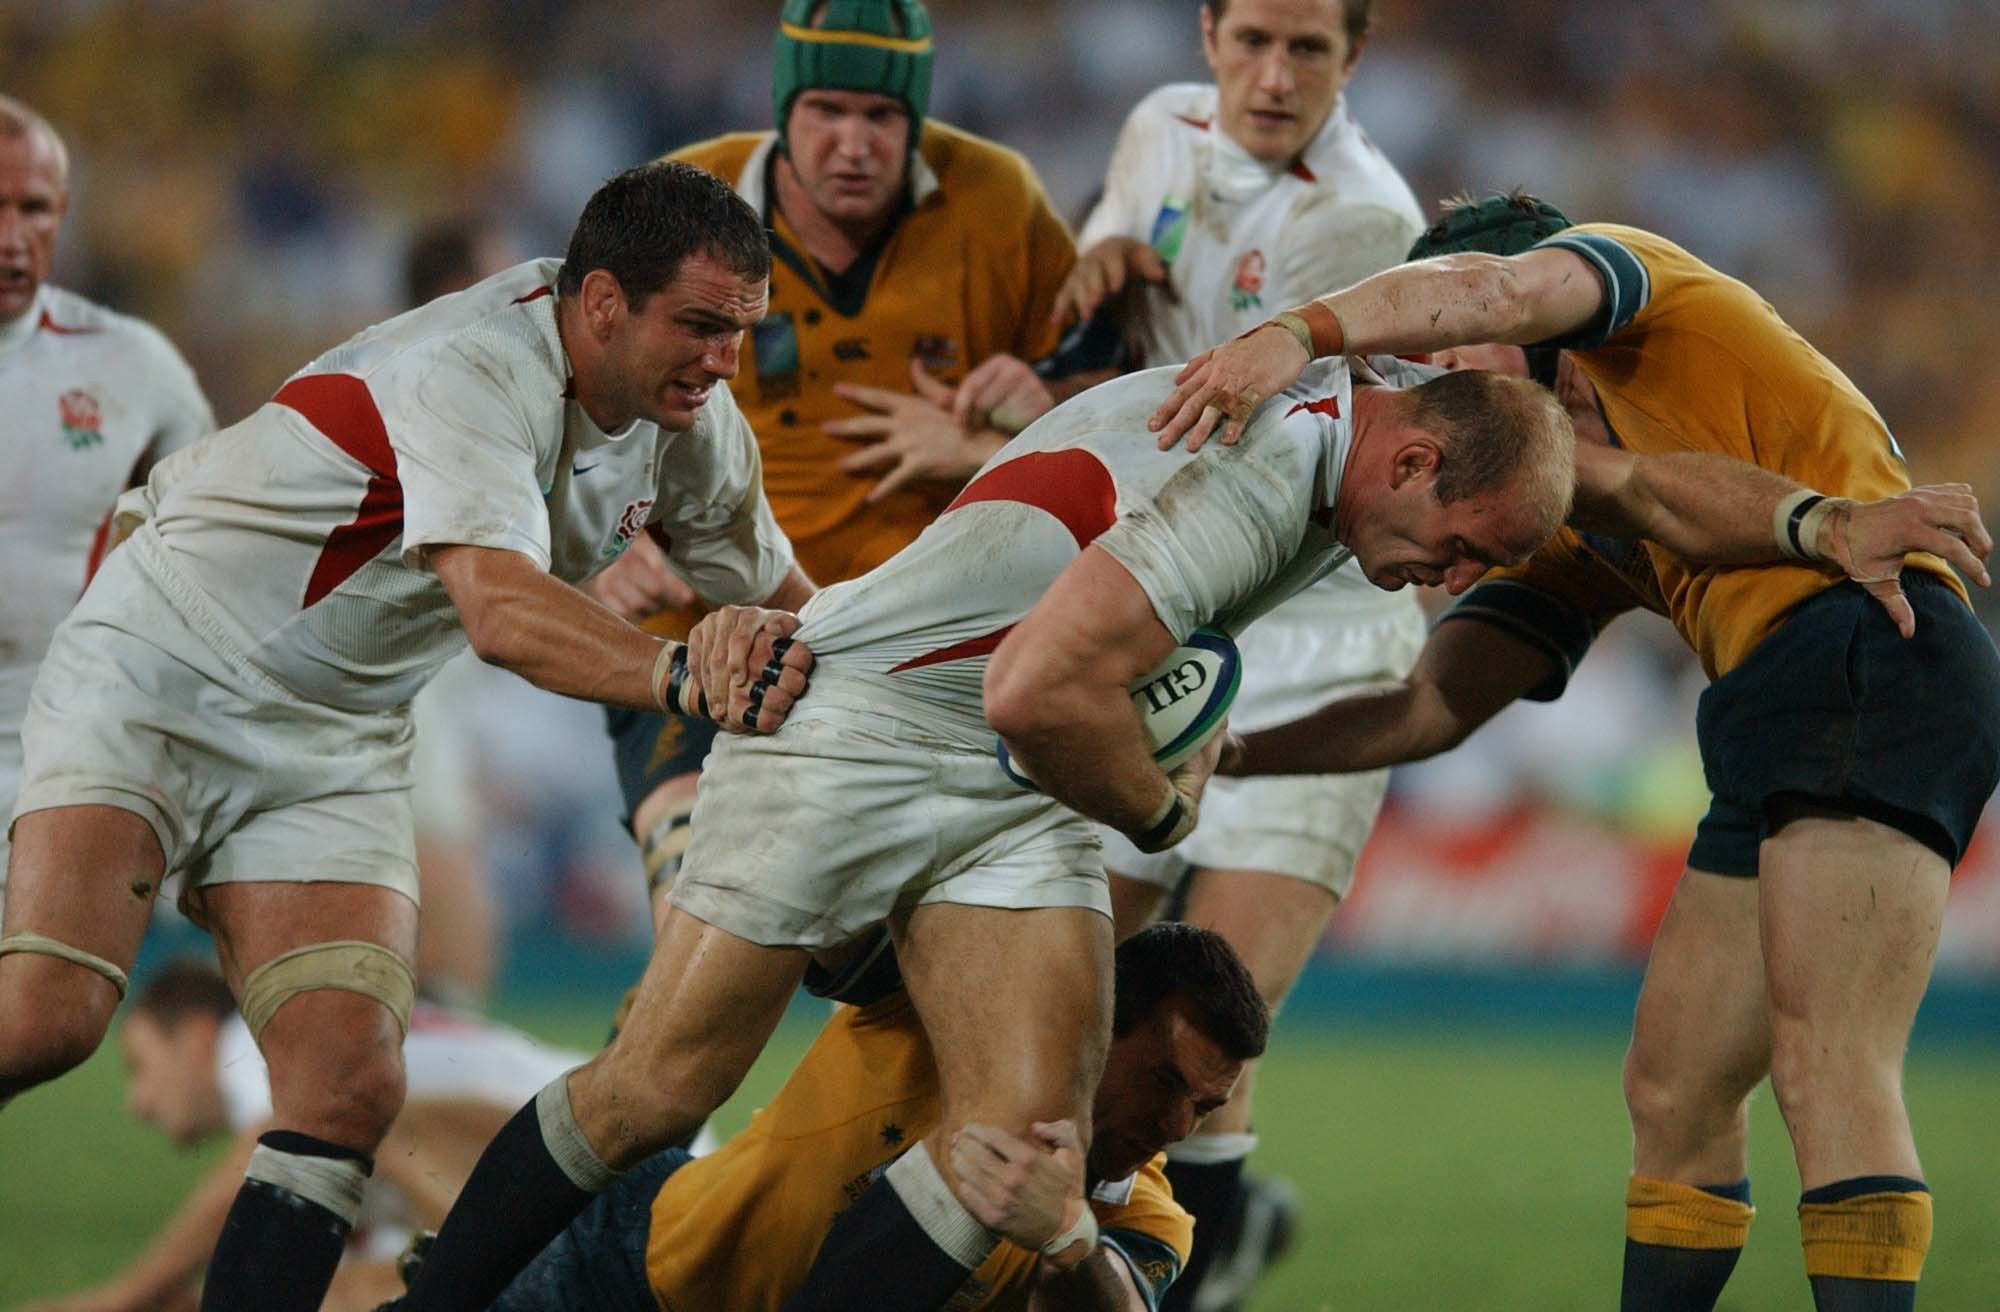 England beat Australia in the 2003 Rugby World Cup final after extra time ©Getty Images